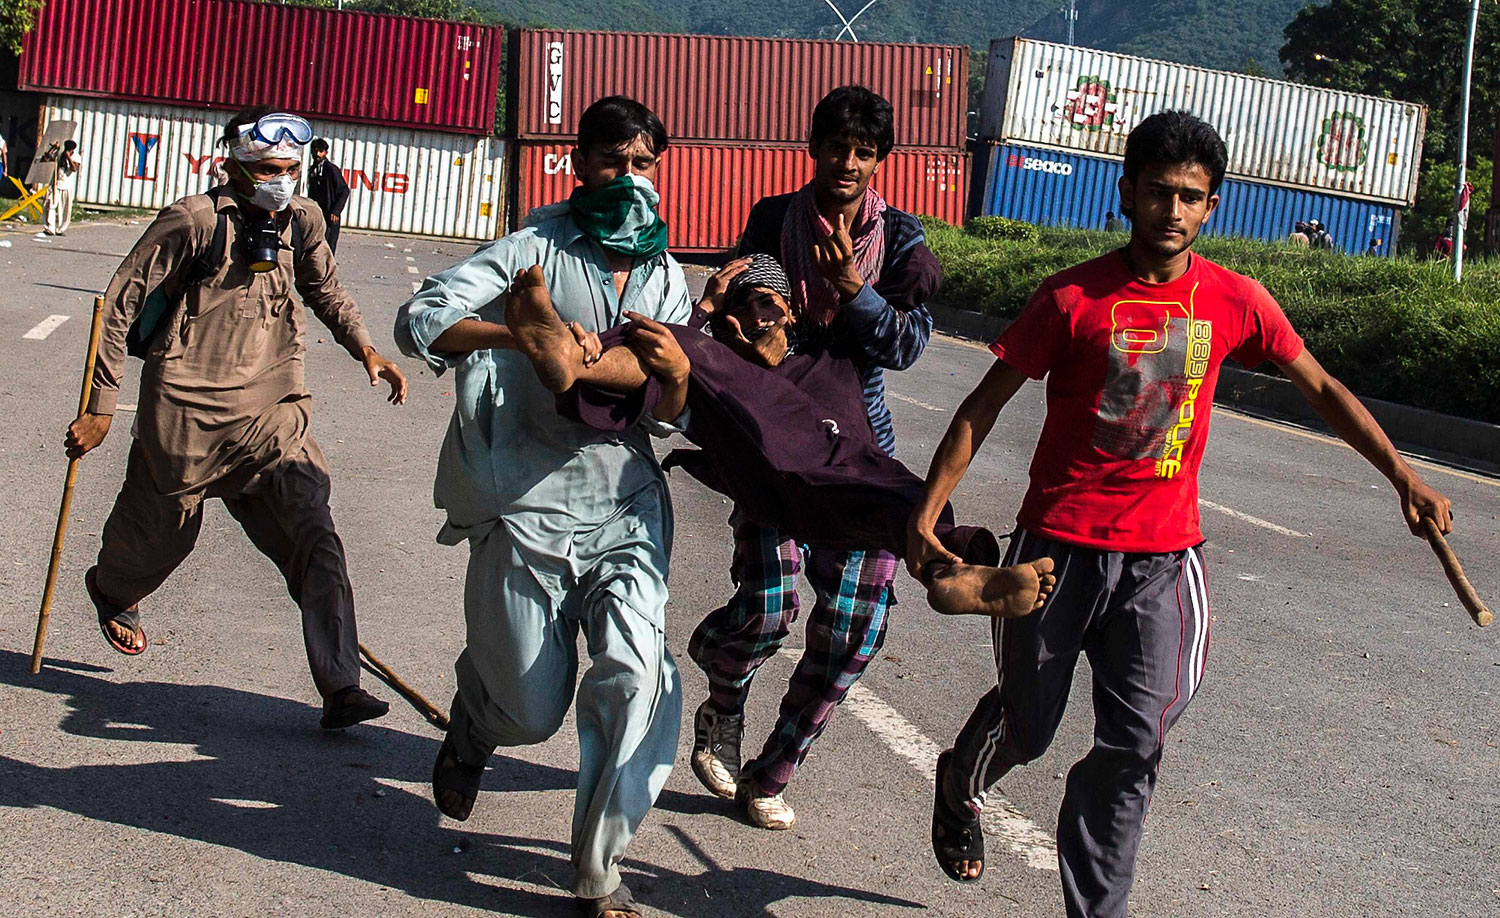 Supporters of Tahir ul-Qadri, Sufi cleric and leader of political party Pakistan Awami Tehreek (PAT), carry an injured fellow protester during the Revolution March in Islamabad, Aug. 31, 2014. (Zohra Bensemra—Reuters)